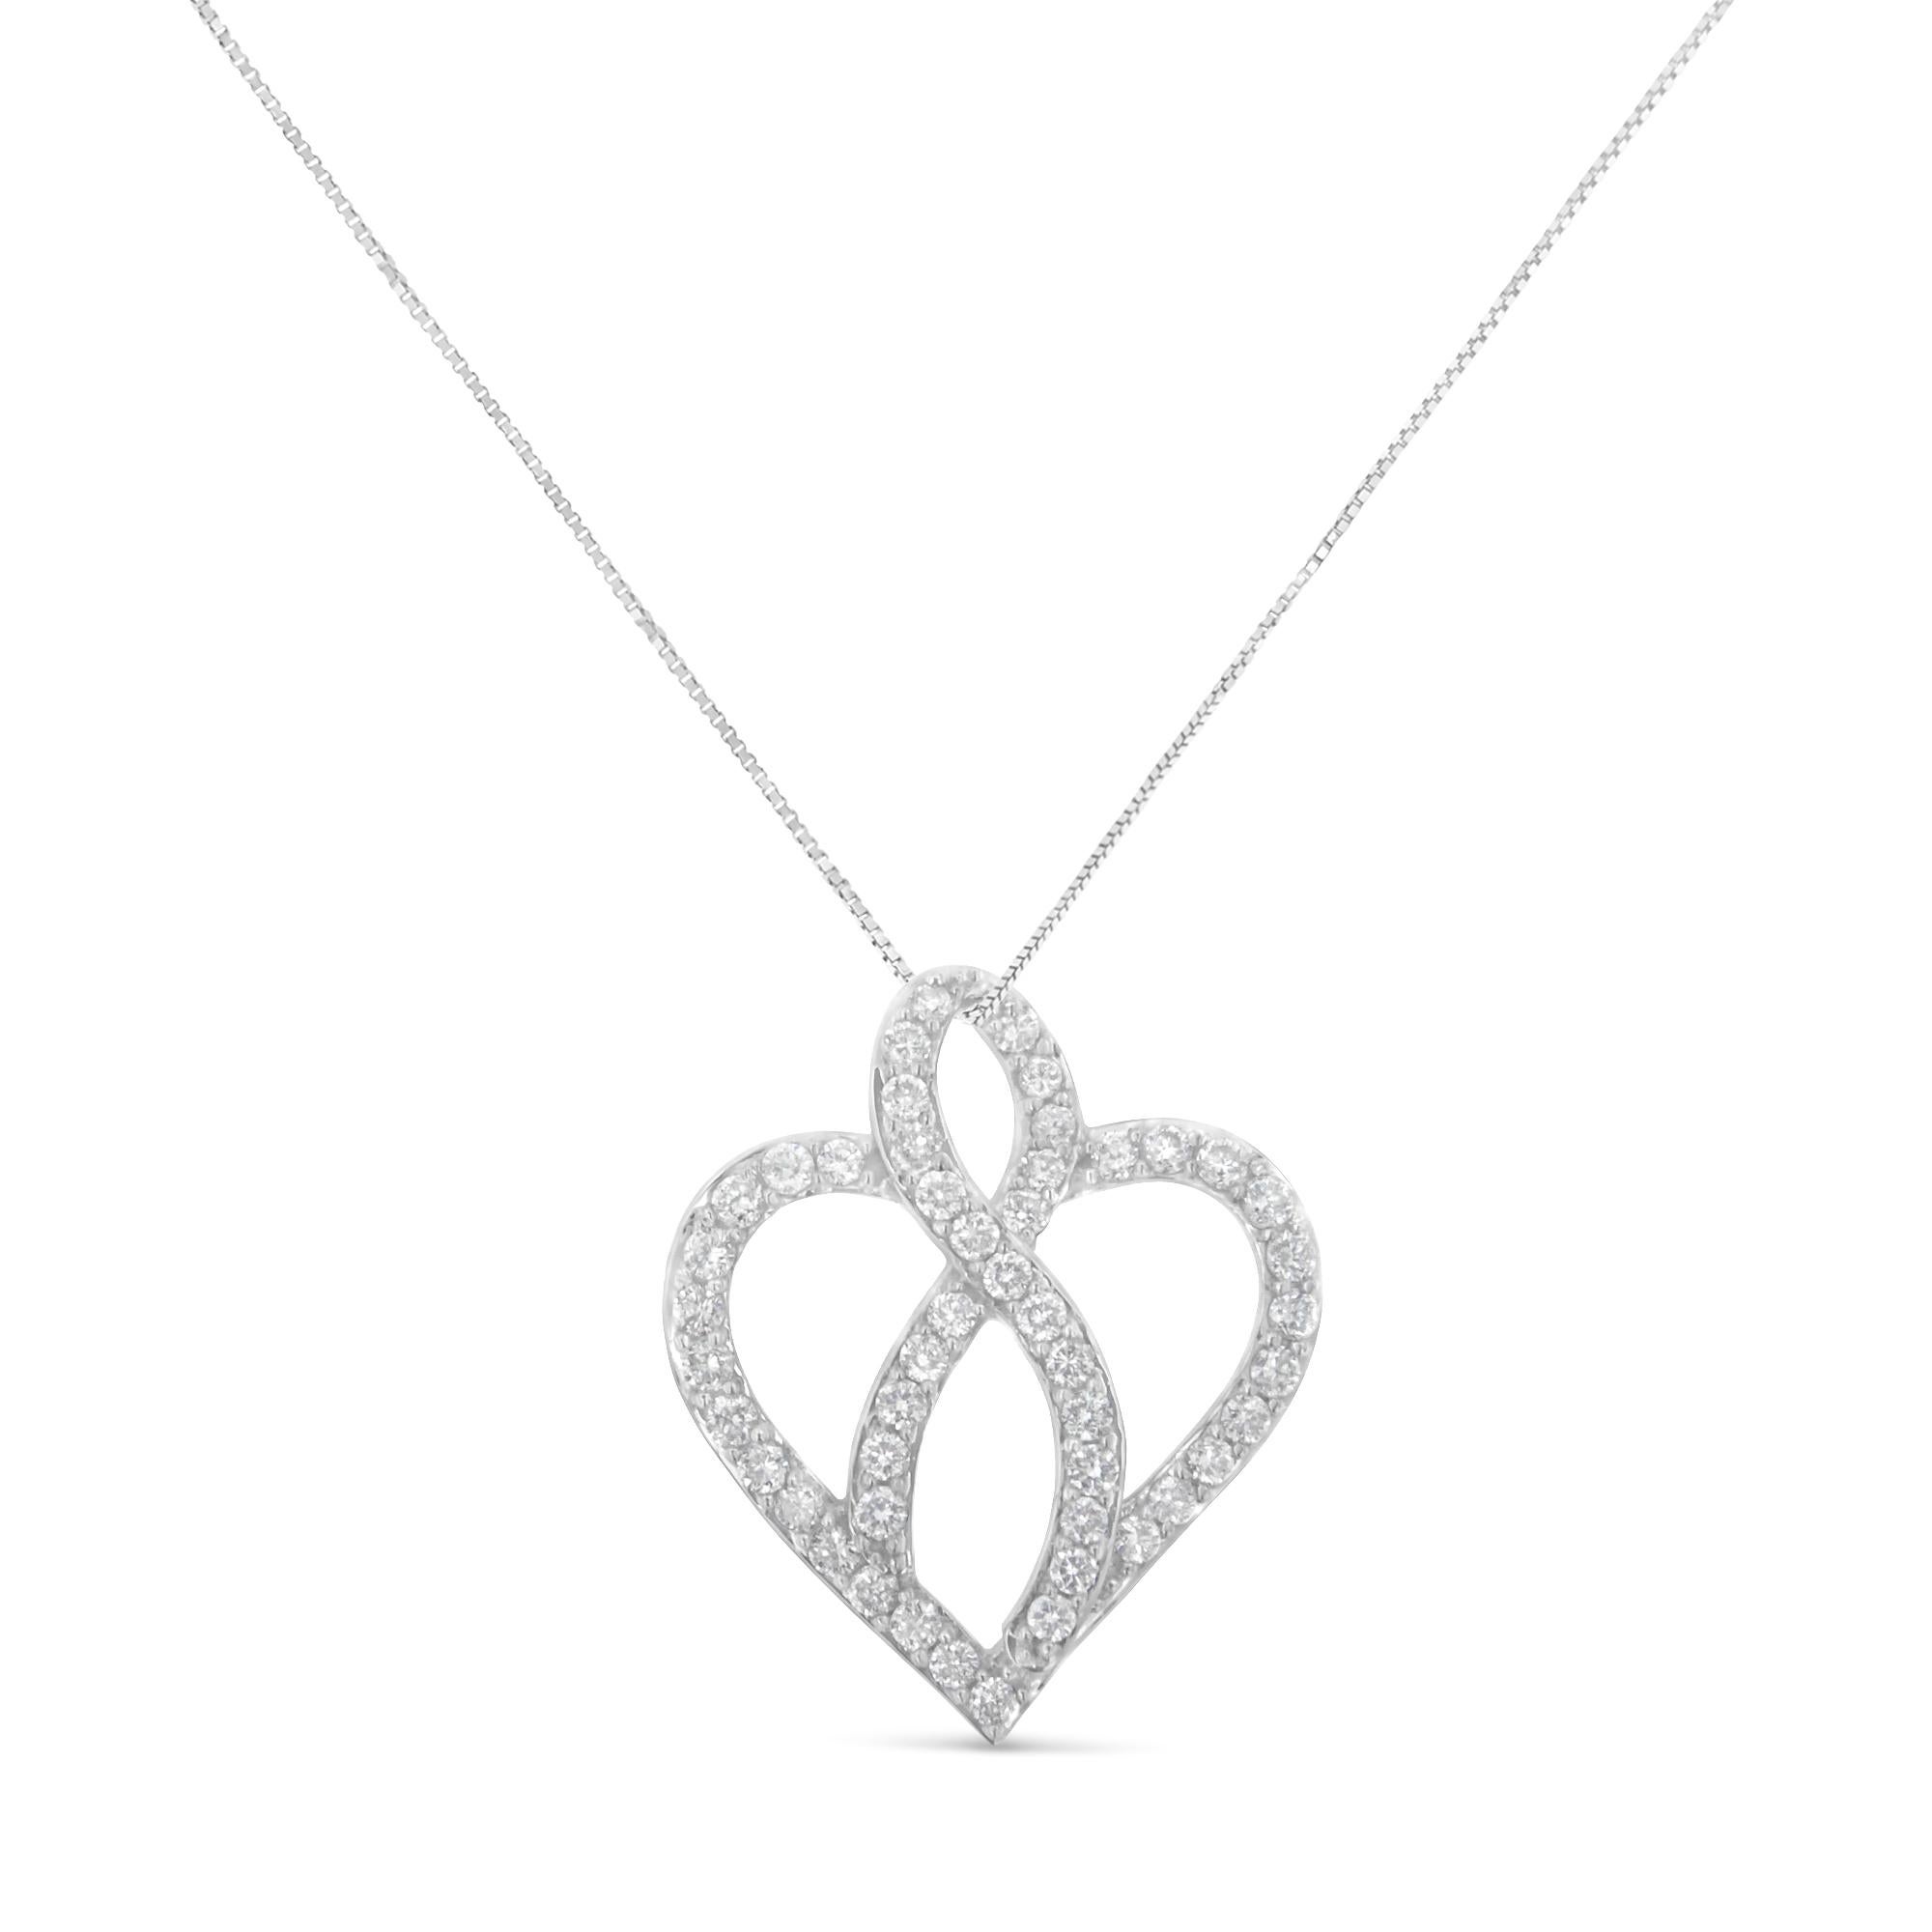 This lovely 14k white gold heart pendant necklace features 1 carat of beautiful, natural diamonds. The heart is intersected with a ribbon at its center, and both motifs are embellished with round-cut diamonds in an elegant prong setting. This